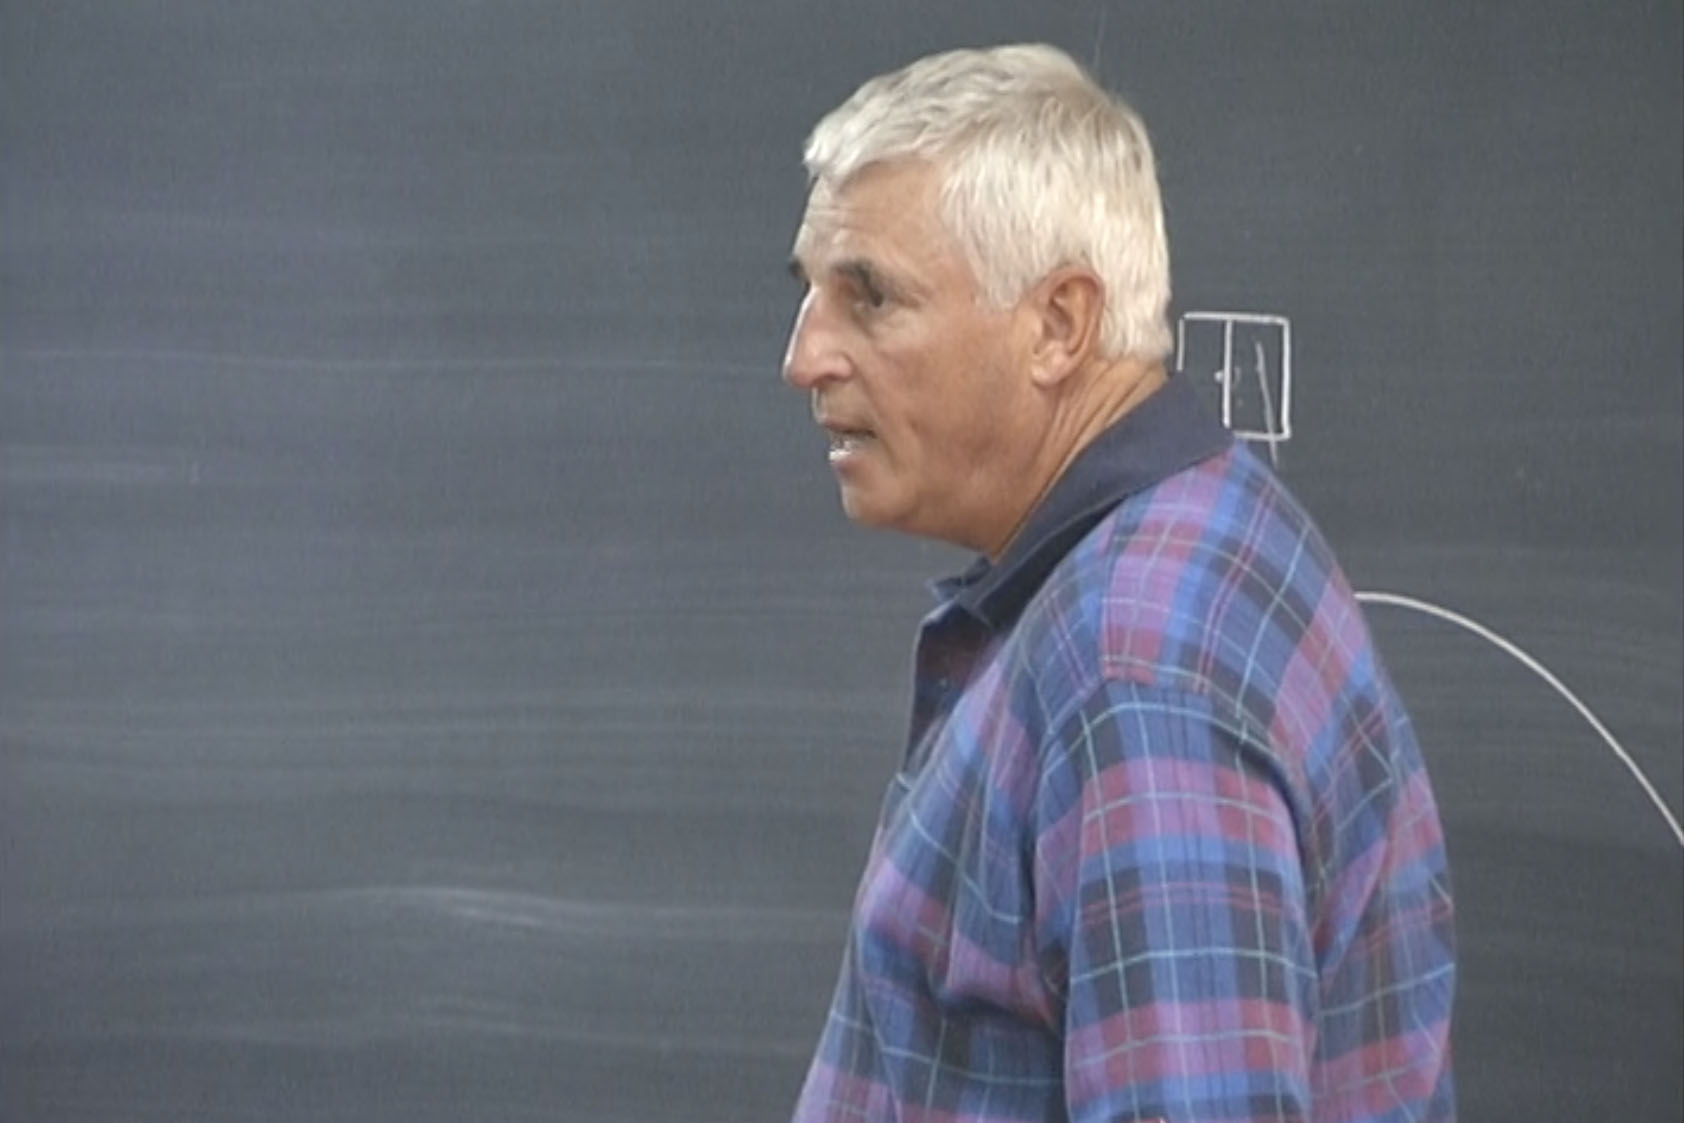 Bob Knight explains the incident that would lead to his firing by Indiana University on Sept. 10, 2020.